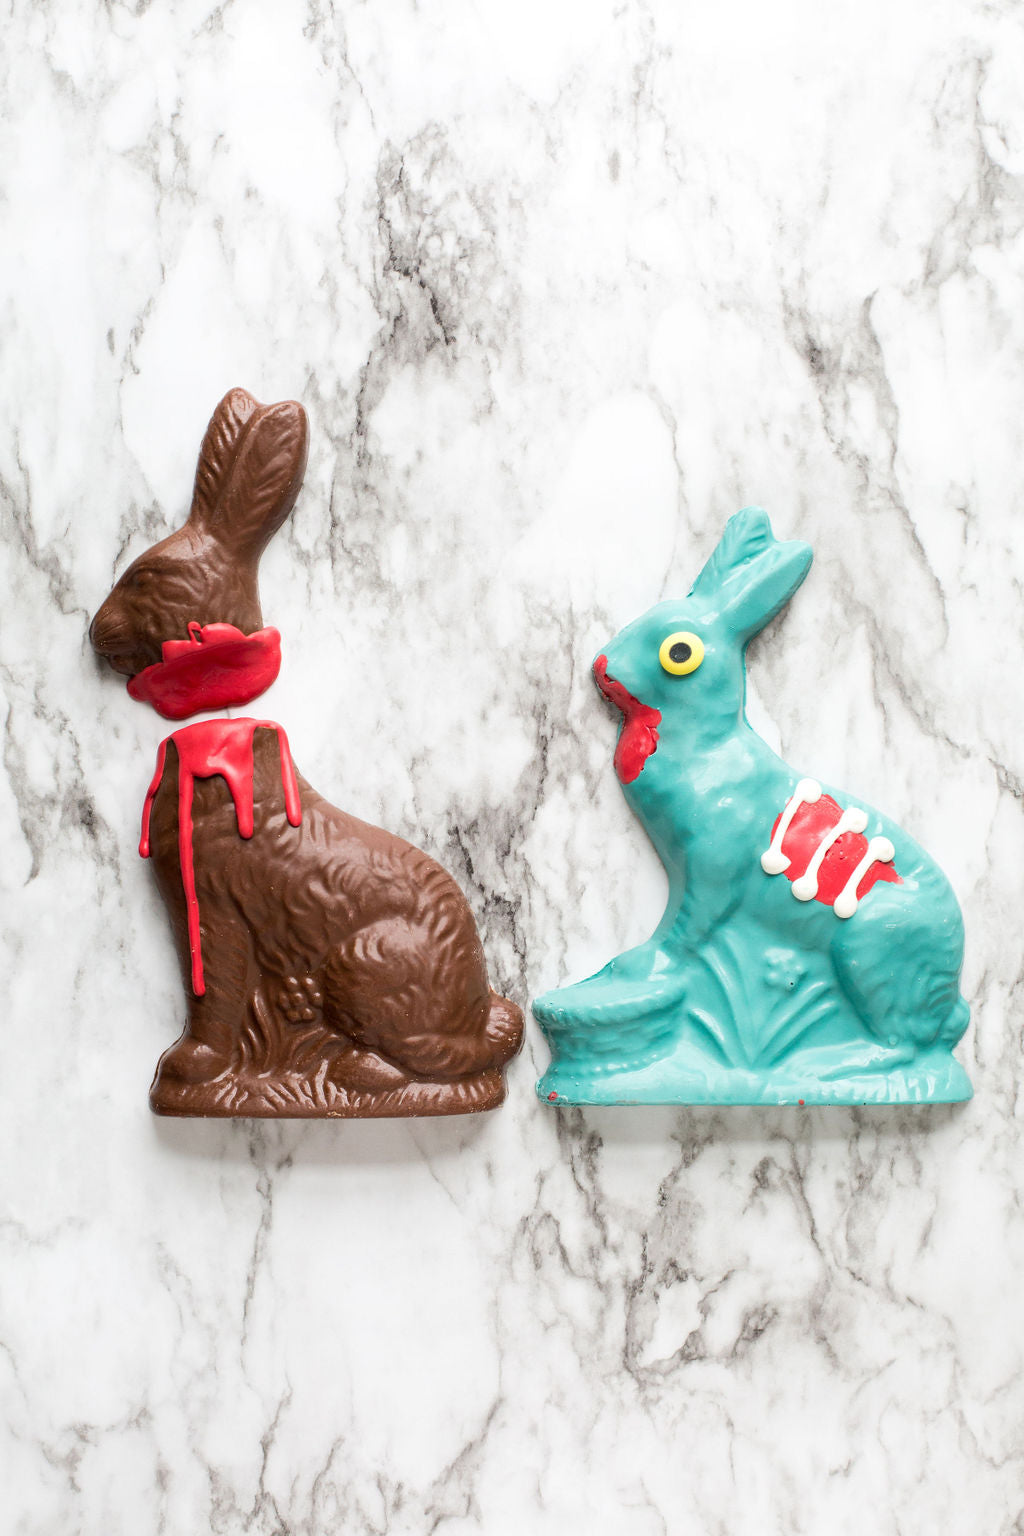 Easter Chocolate Zombie + Victim Bunny Set - 2 Pack by Sugar Plum |  Goldbelly